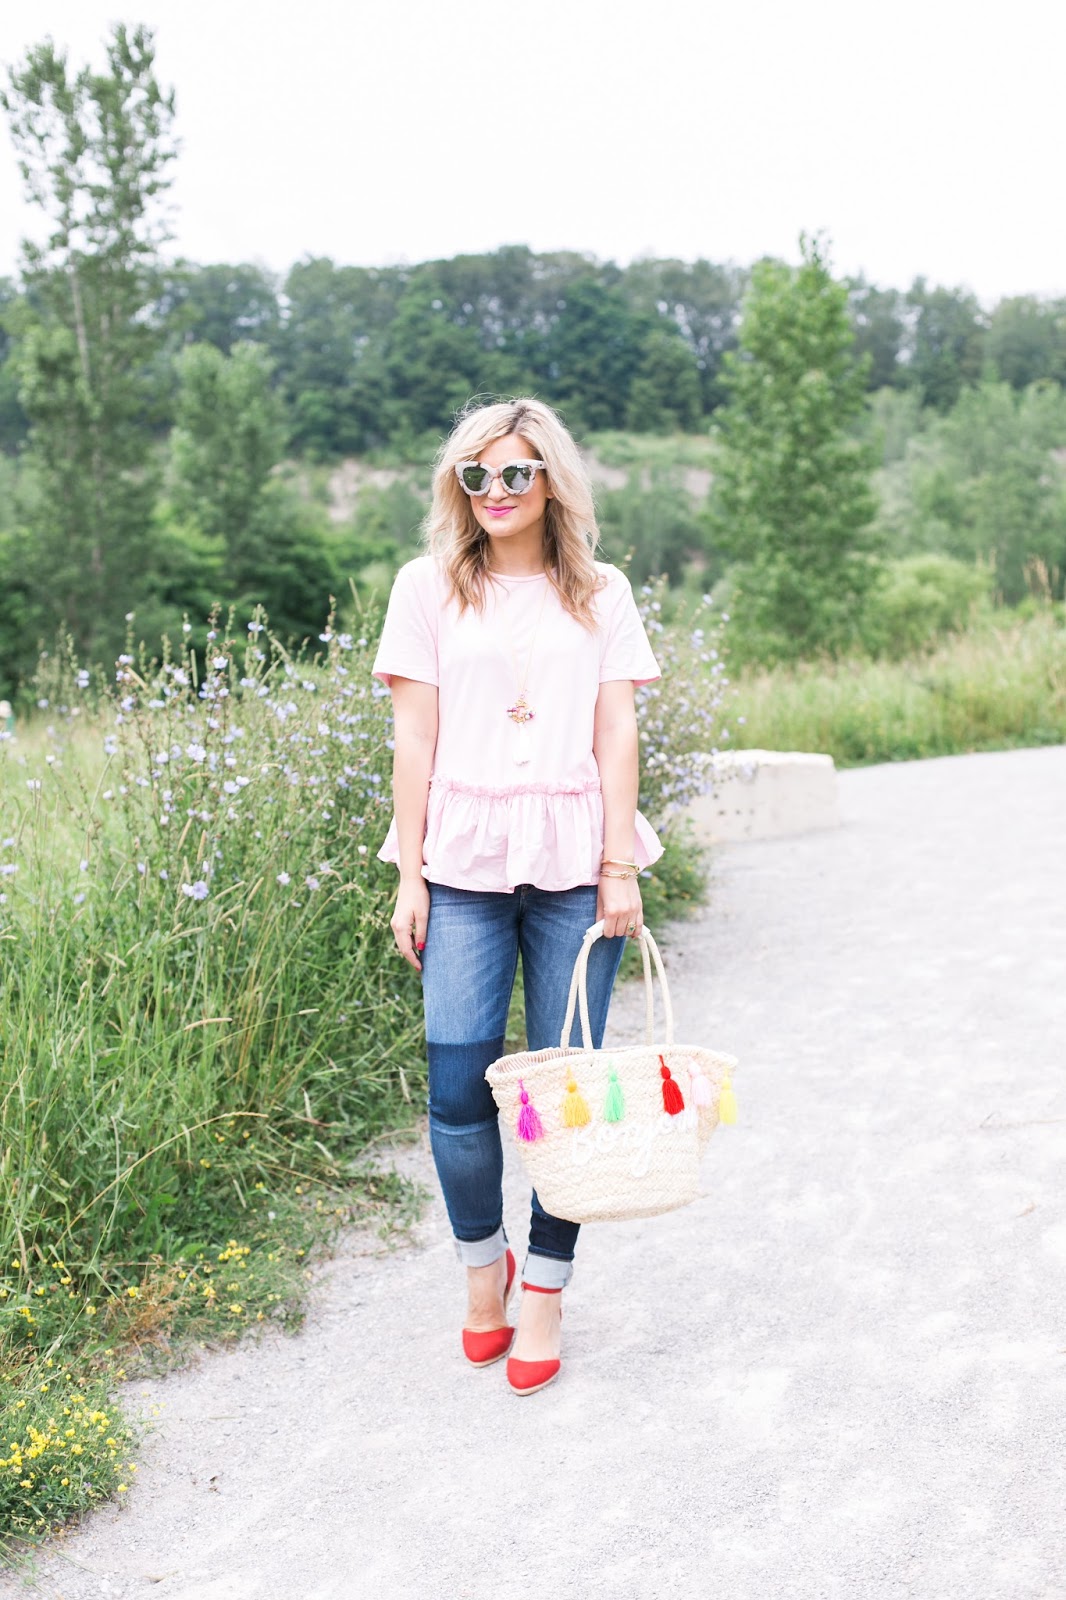 Bijuleni | 8 Easy tips for Taking Amazing Outfit Photos - Pink peplum top, Guess jeggings, red wedges, bonjour straw bag ootd .